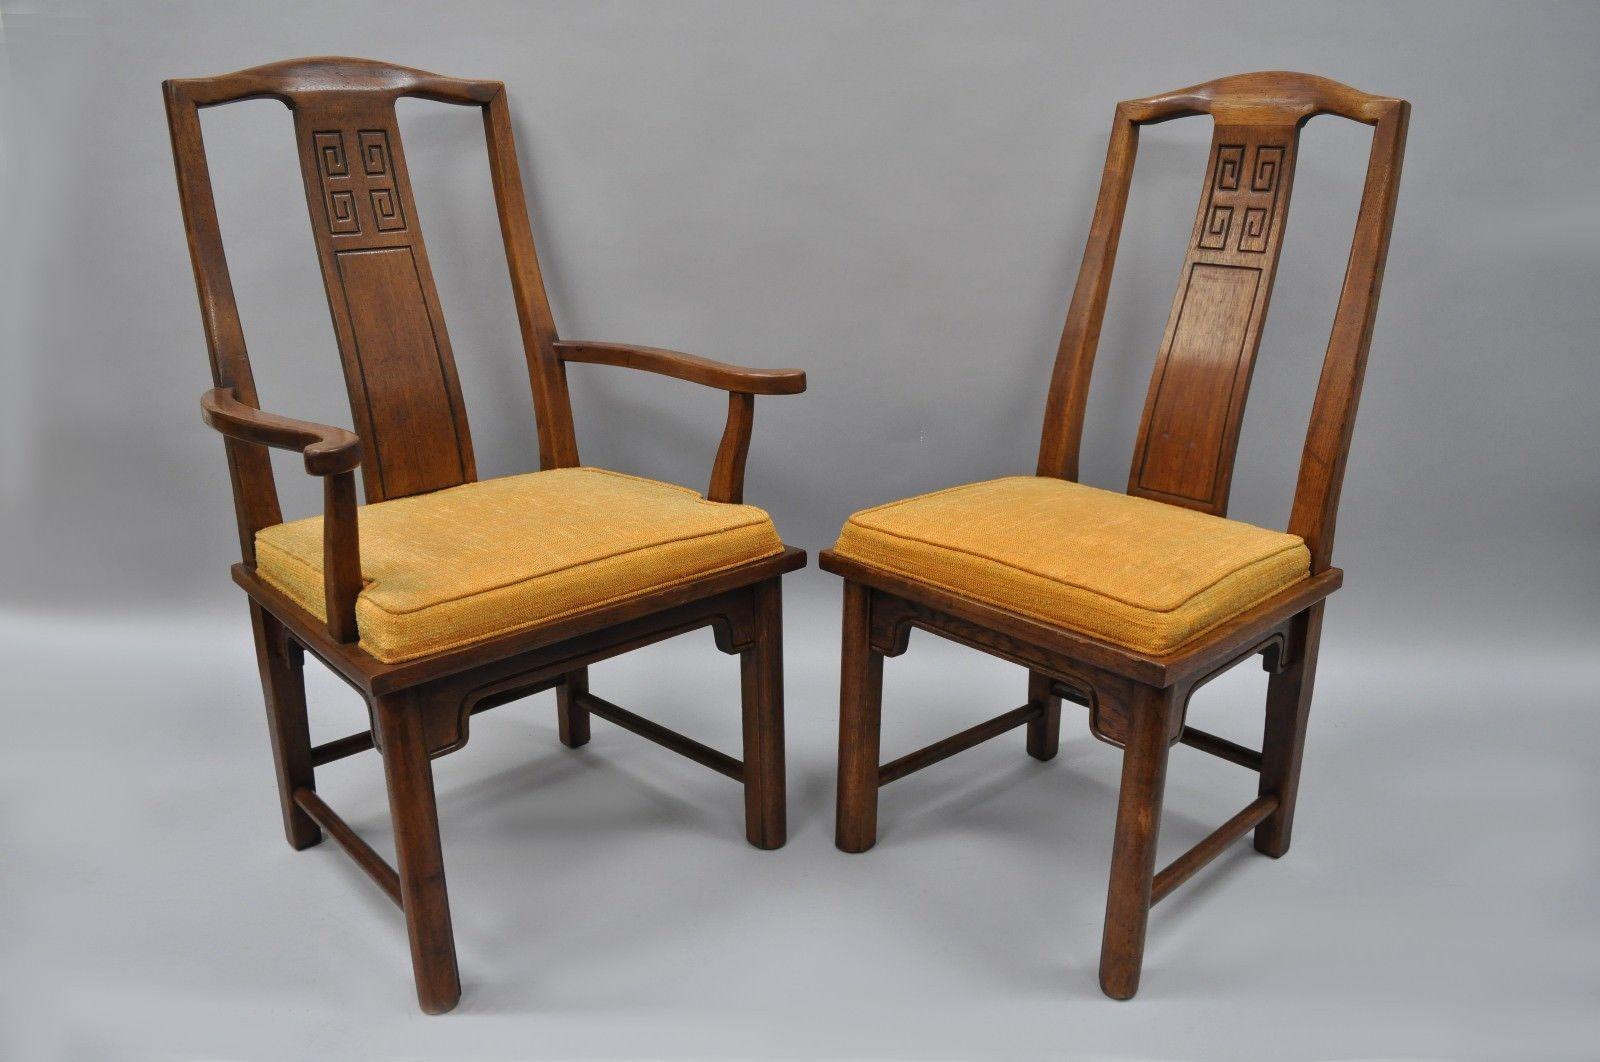 Set of six vintage oriental James Mont style dining chairs by century furniture. Item features heavy solid wood construction, beautiful woodgrain, nicely carved details, original label, quality American craftsmanship, circa 1960s. Measurements: